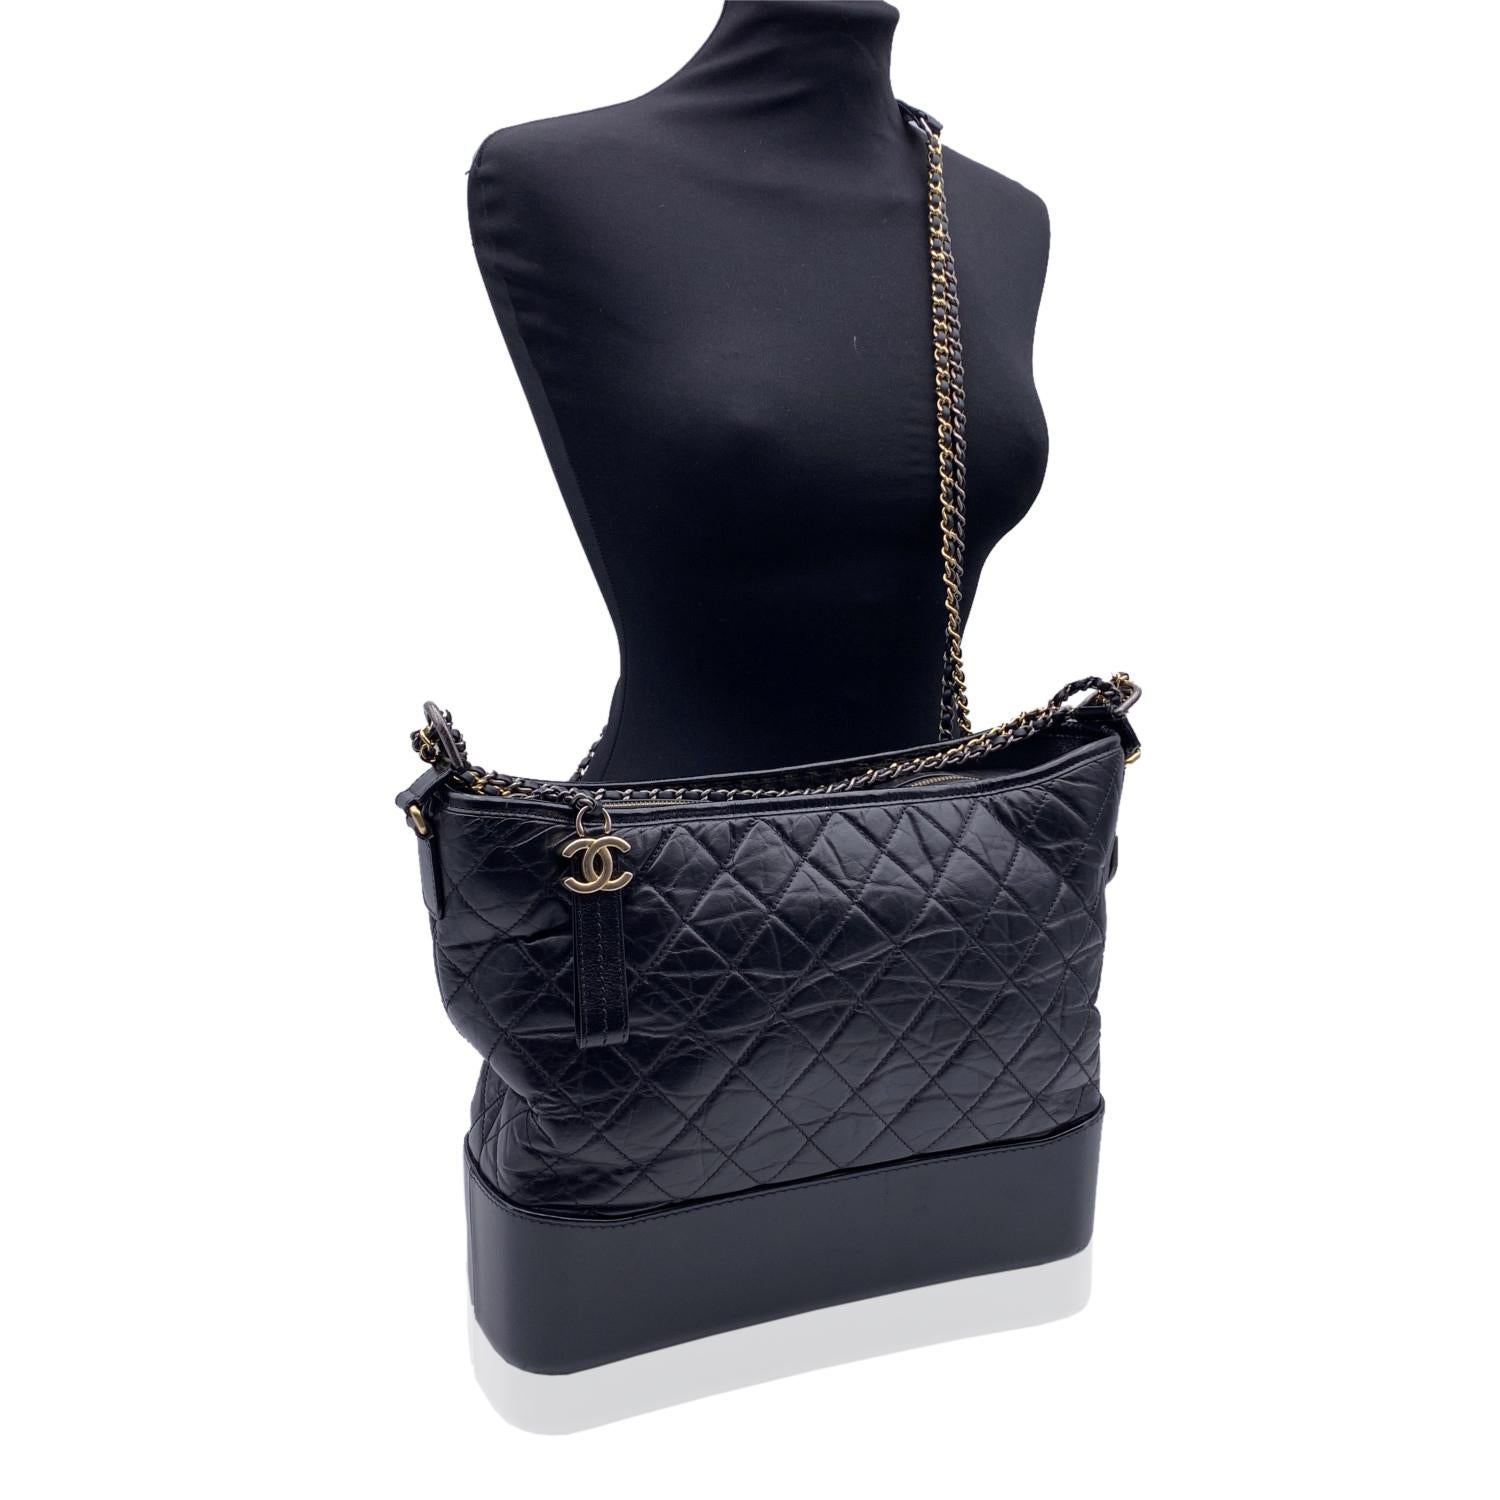 Chanel Gabrielle Large Hobo Bag crafted in black quilted leather. Period/Era: 2017. The bag is inspired by vintage binocular cases that men wear at the racecourse. Unisex model. It is crafted in black leather and it feature upper zipper closure,